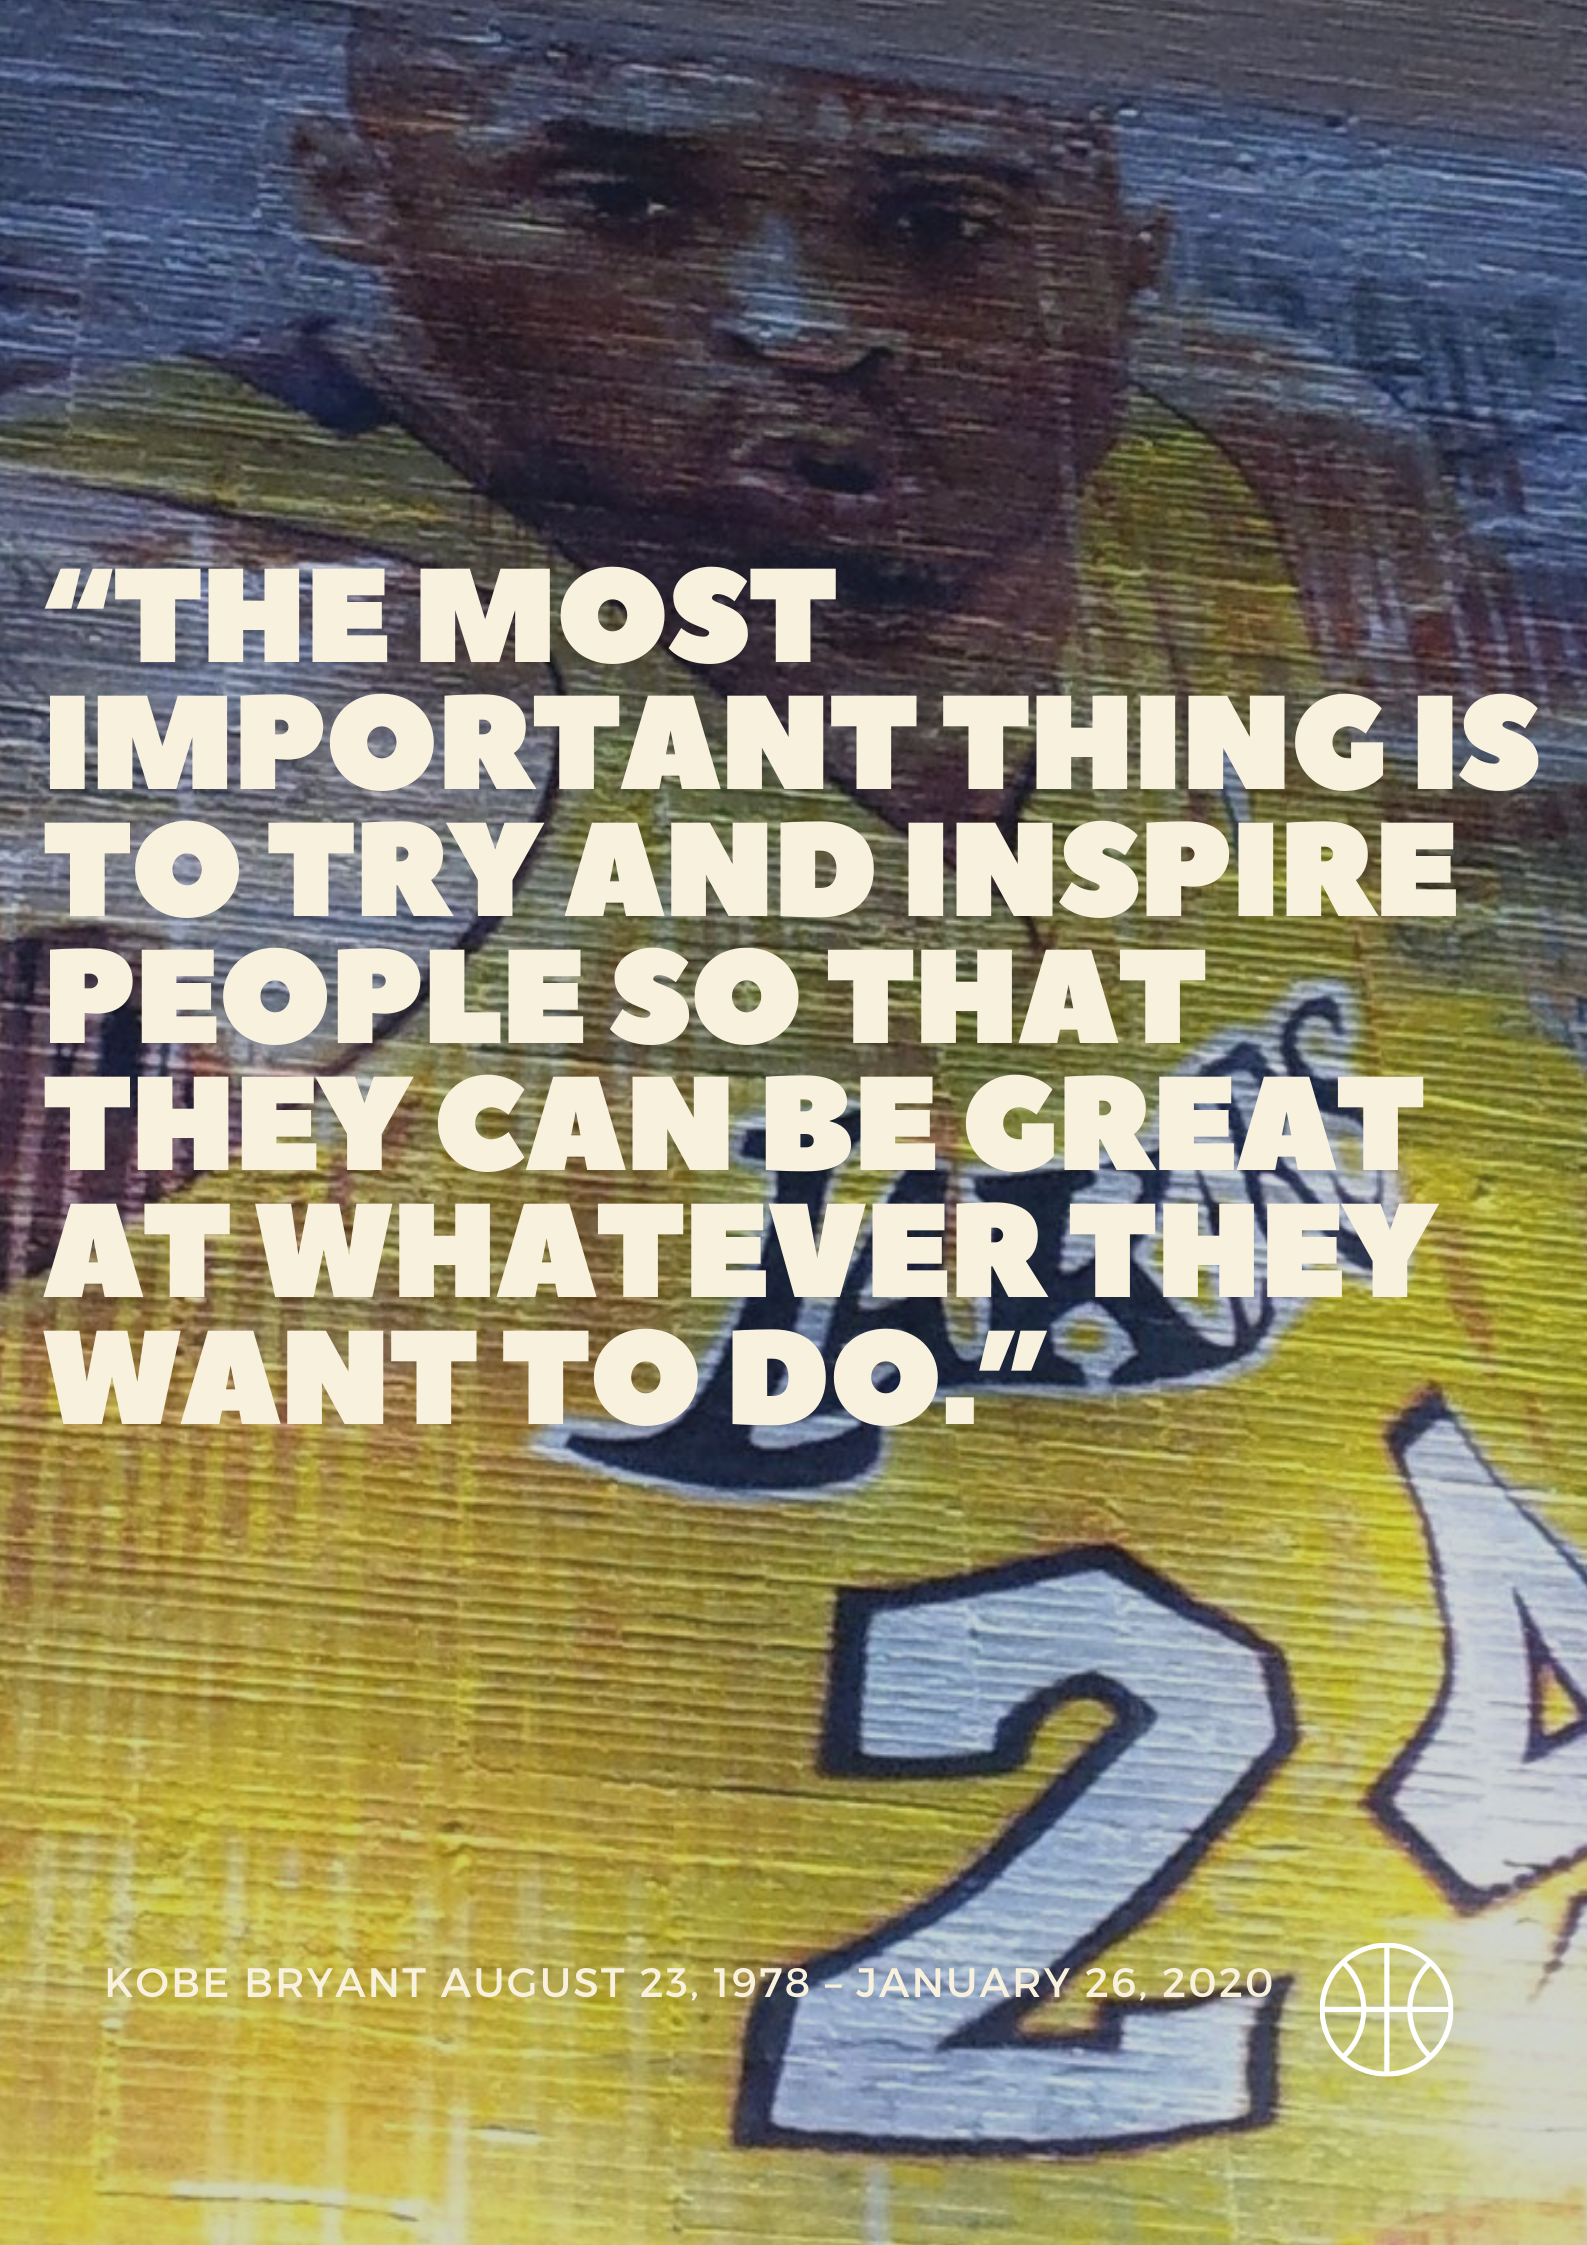 30 Best Kobe Bryant Quotes to Inspire You